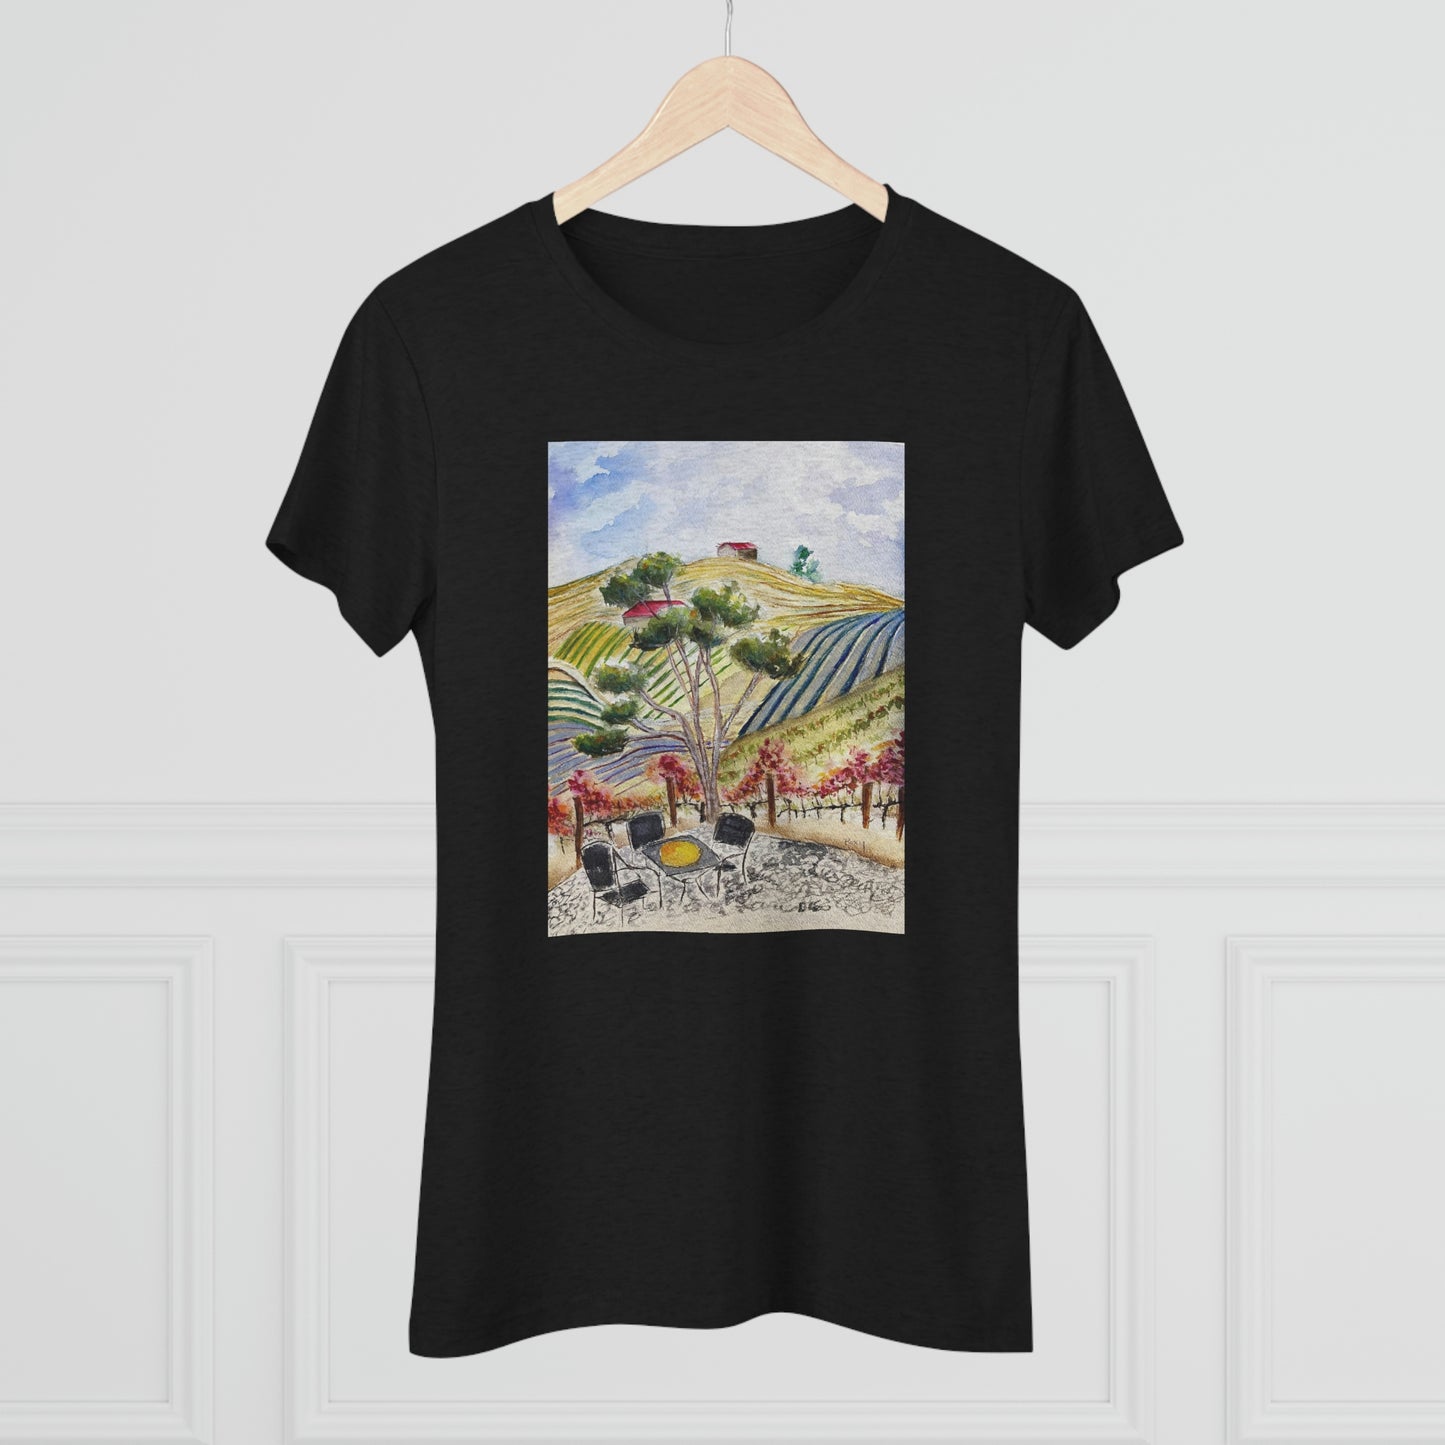 View from the Patio at GBV Temecula Women's fitted Triblend Tee  tee shirt